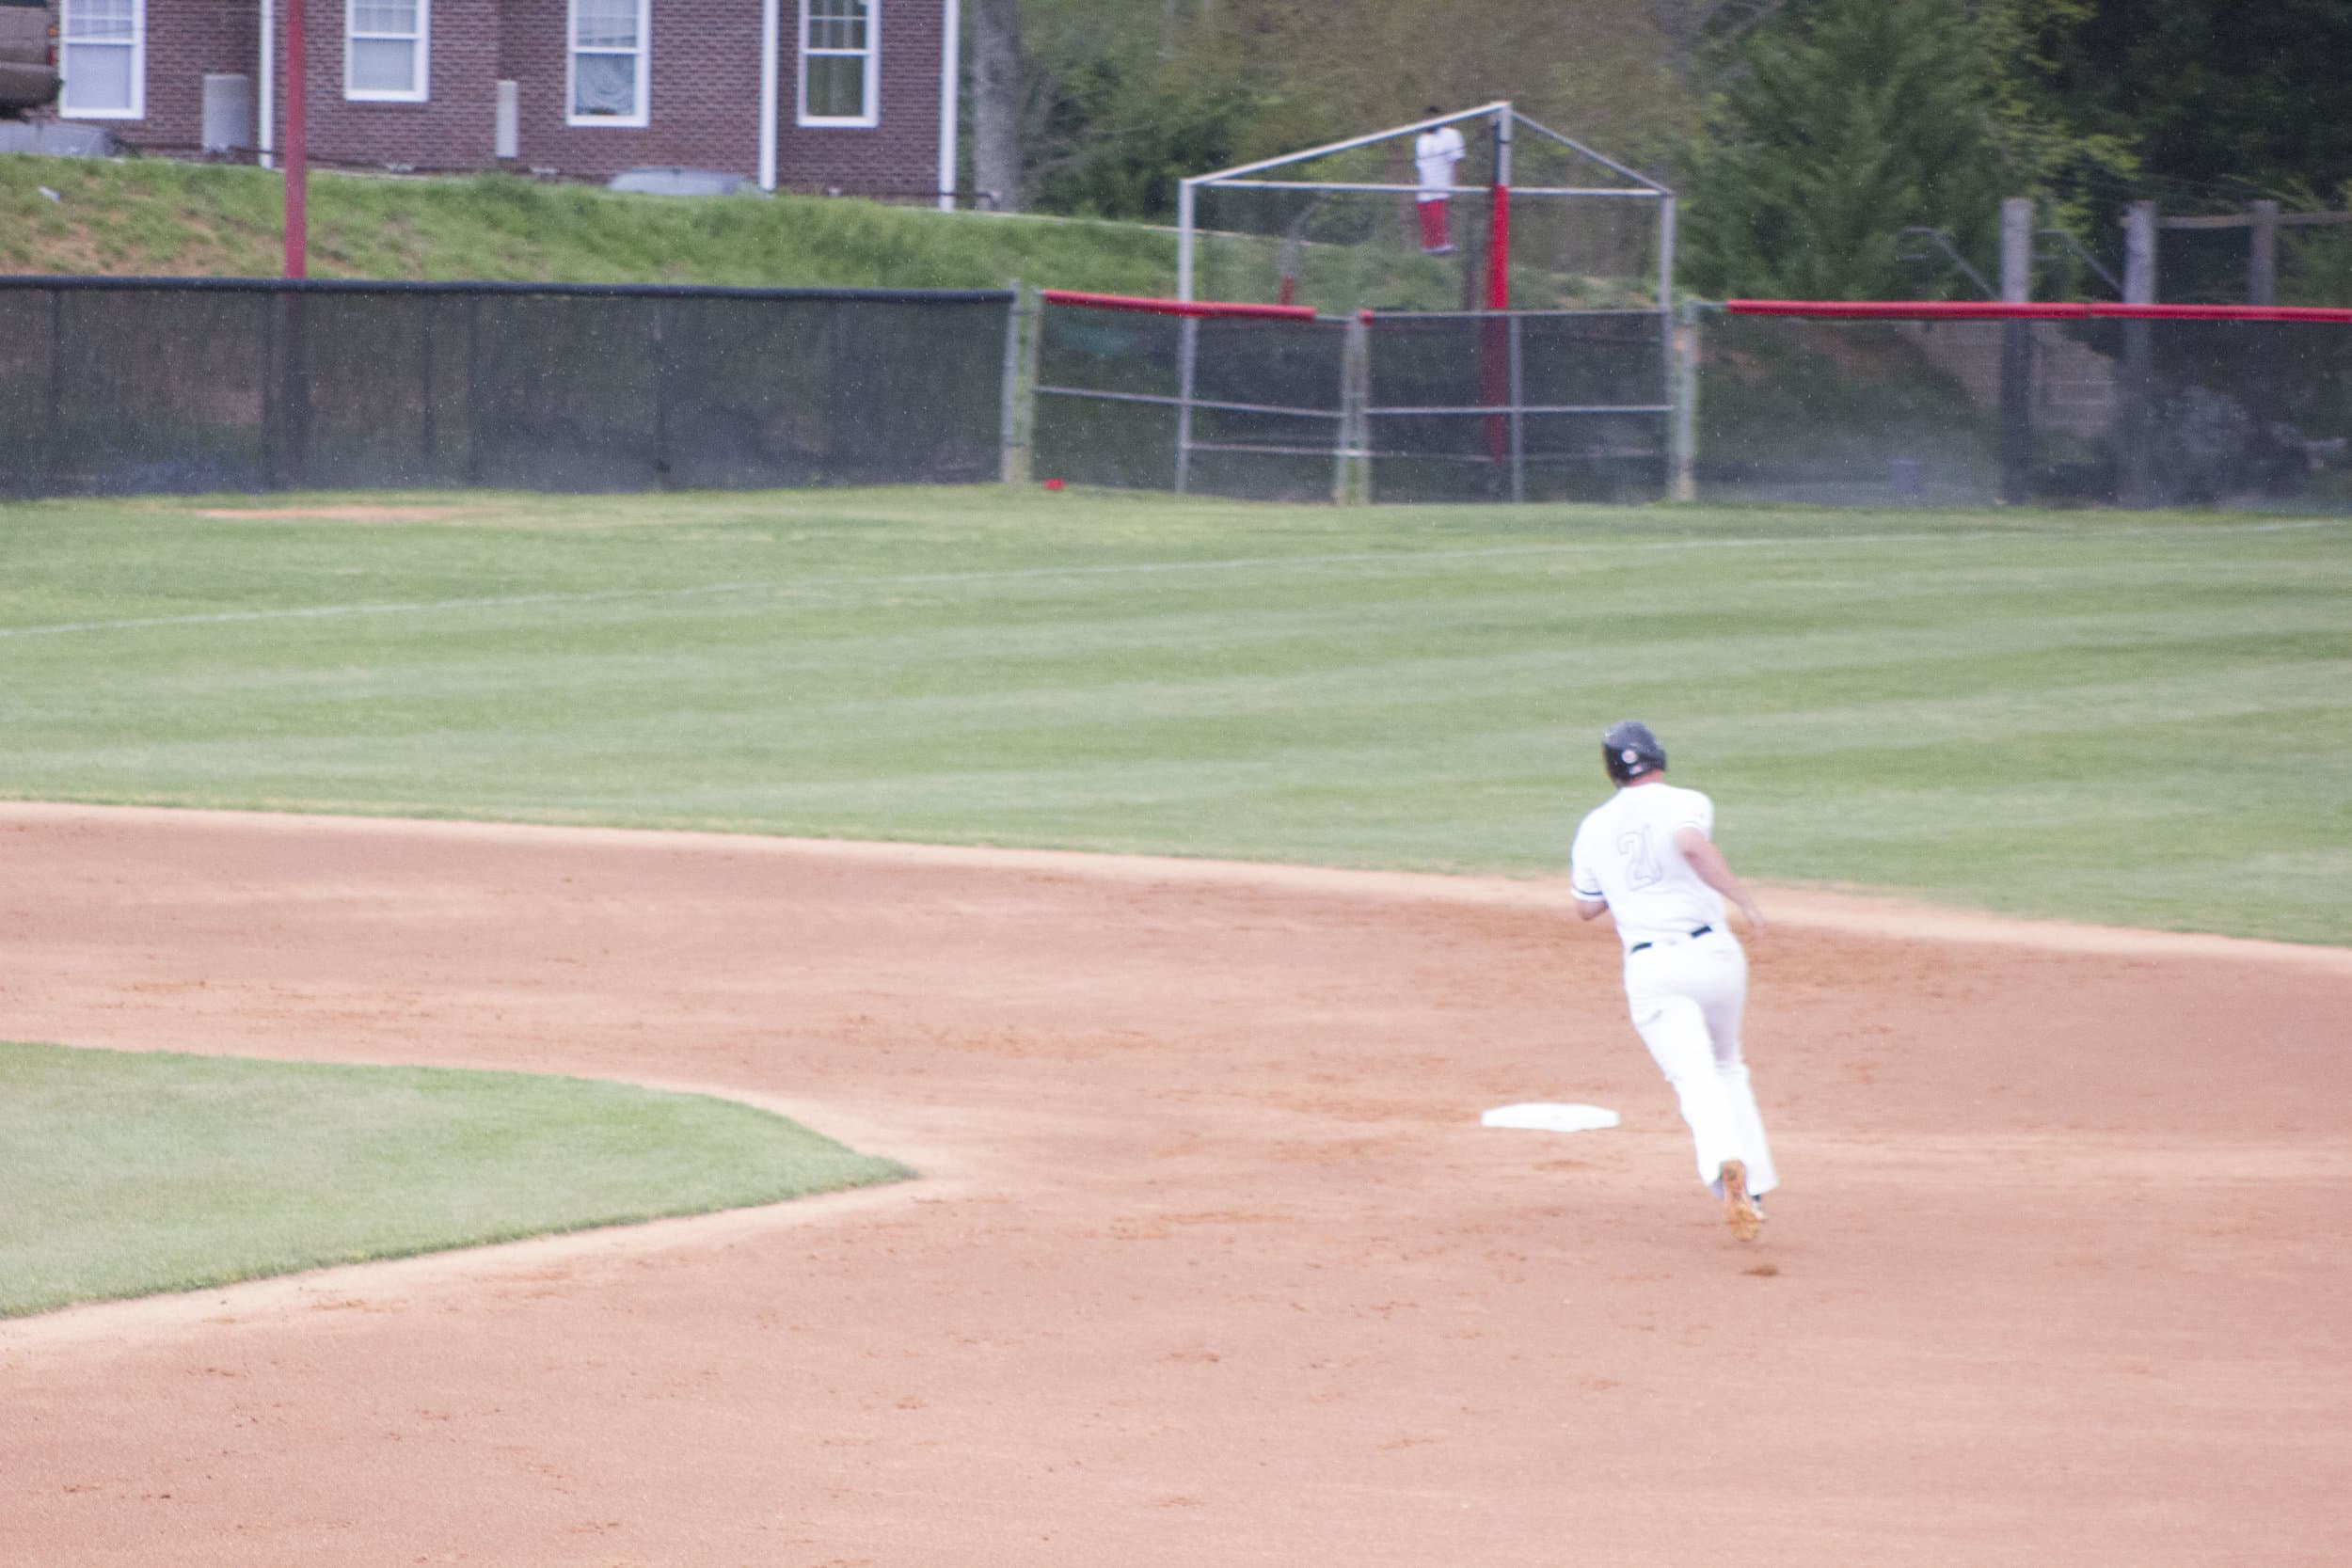 Nathaniel Maggio rounds second base after crushing a home run over midfield.